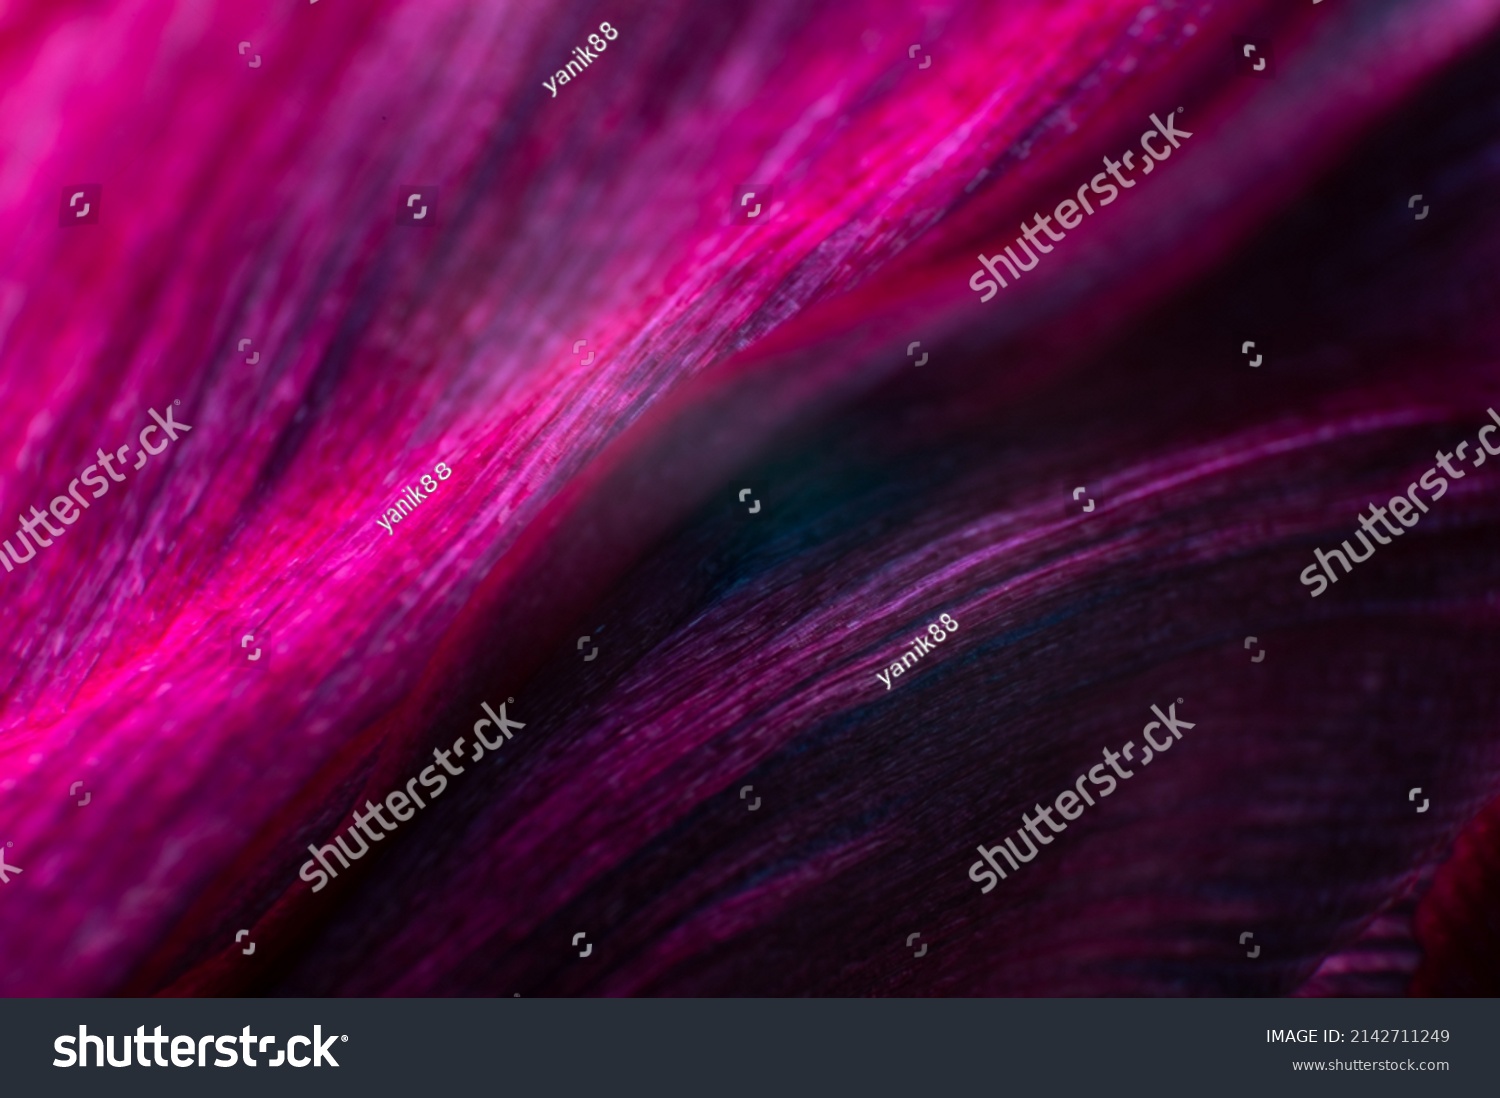 Extreme macro Bright close-up of a flower petal in pink. Abstract flower petal texture background. #2142711249